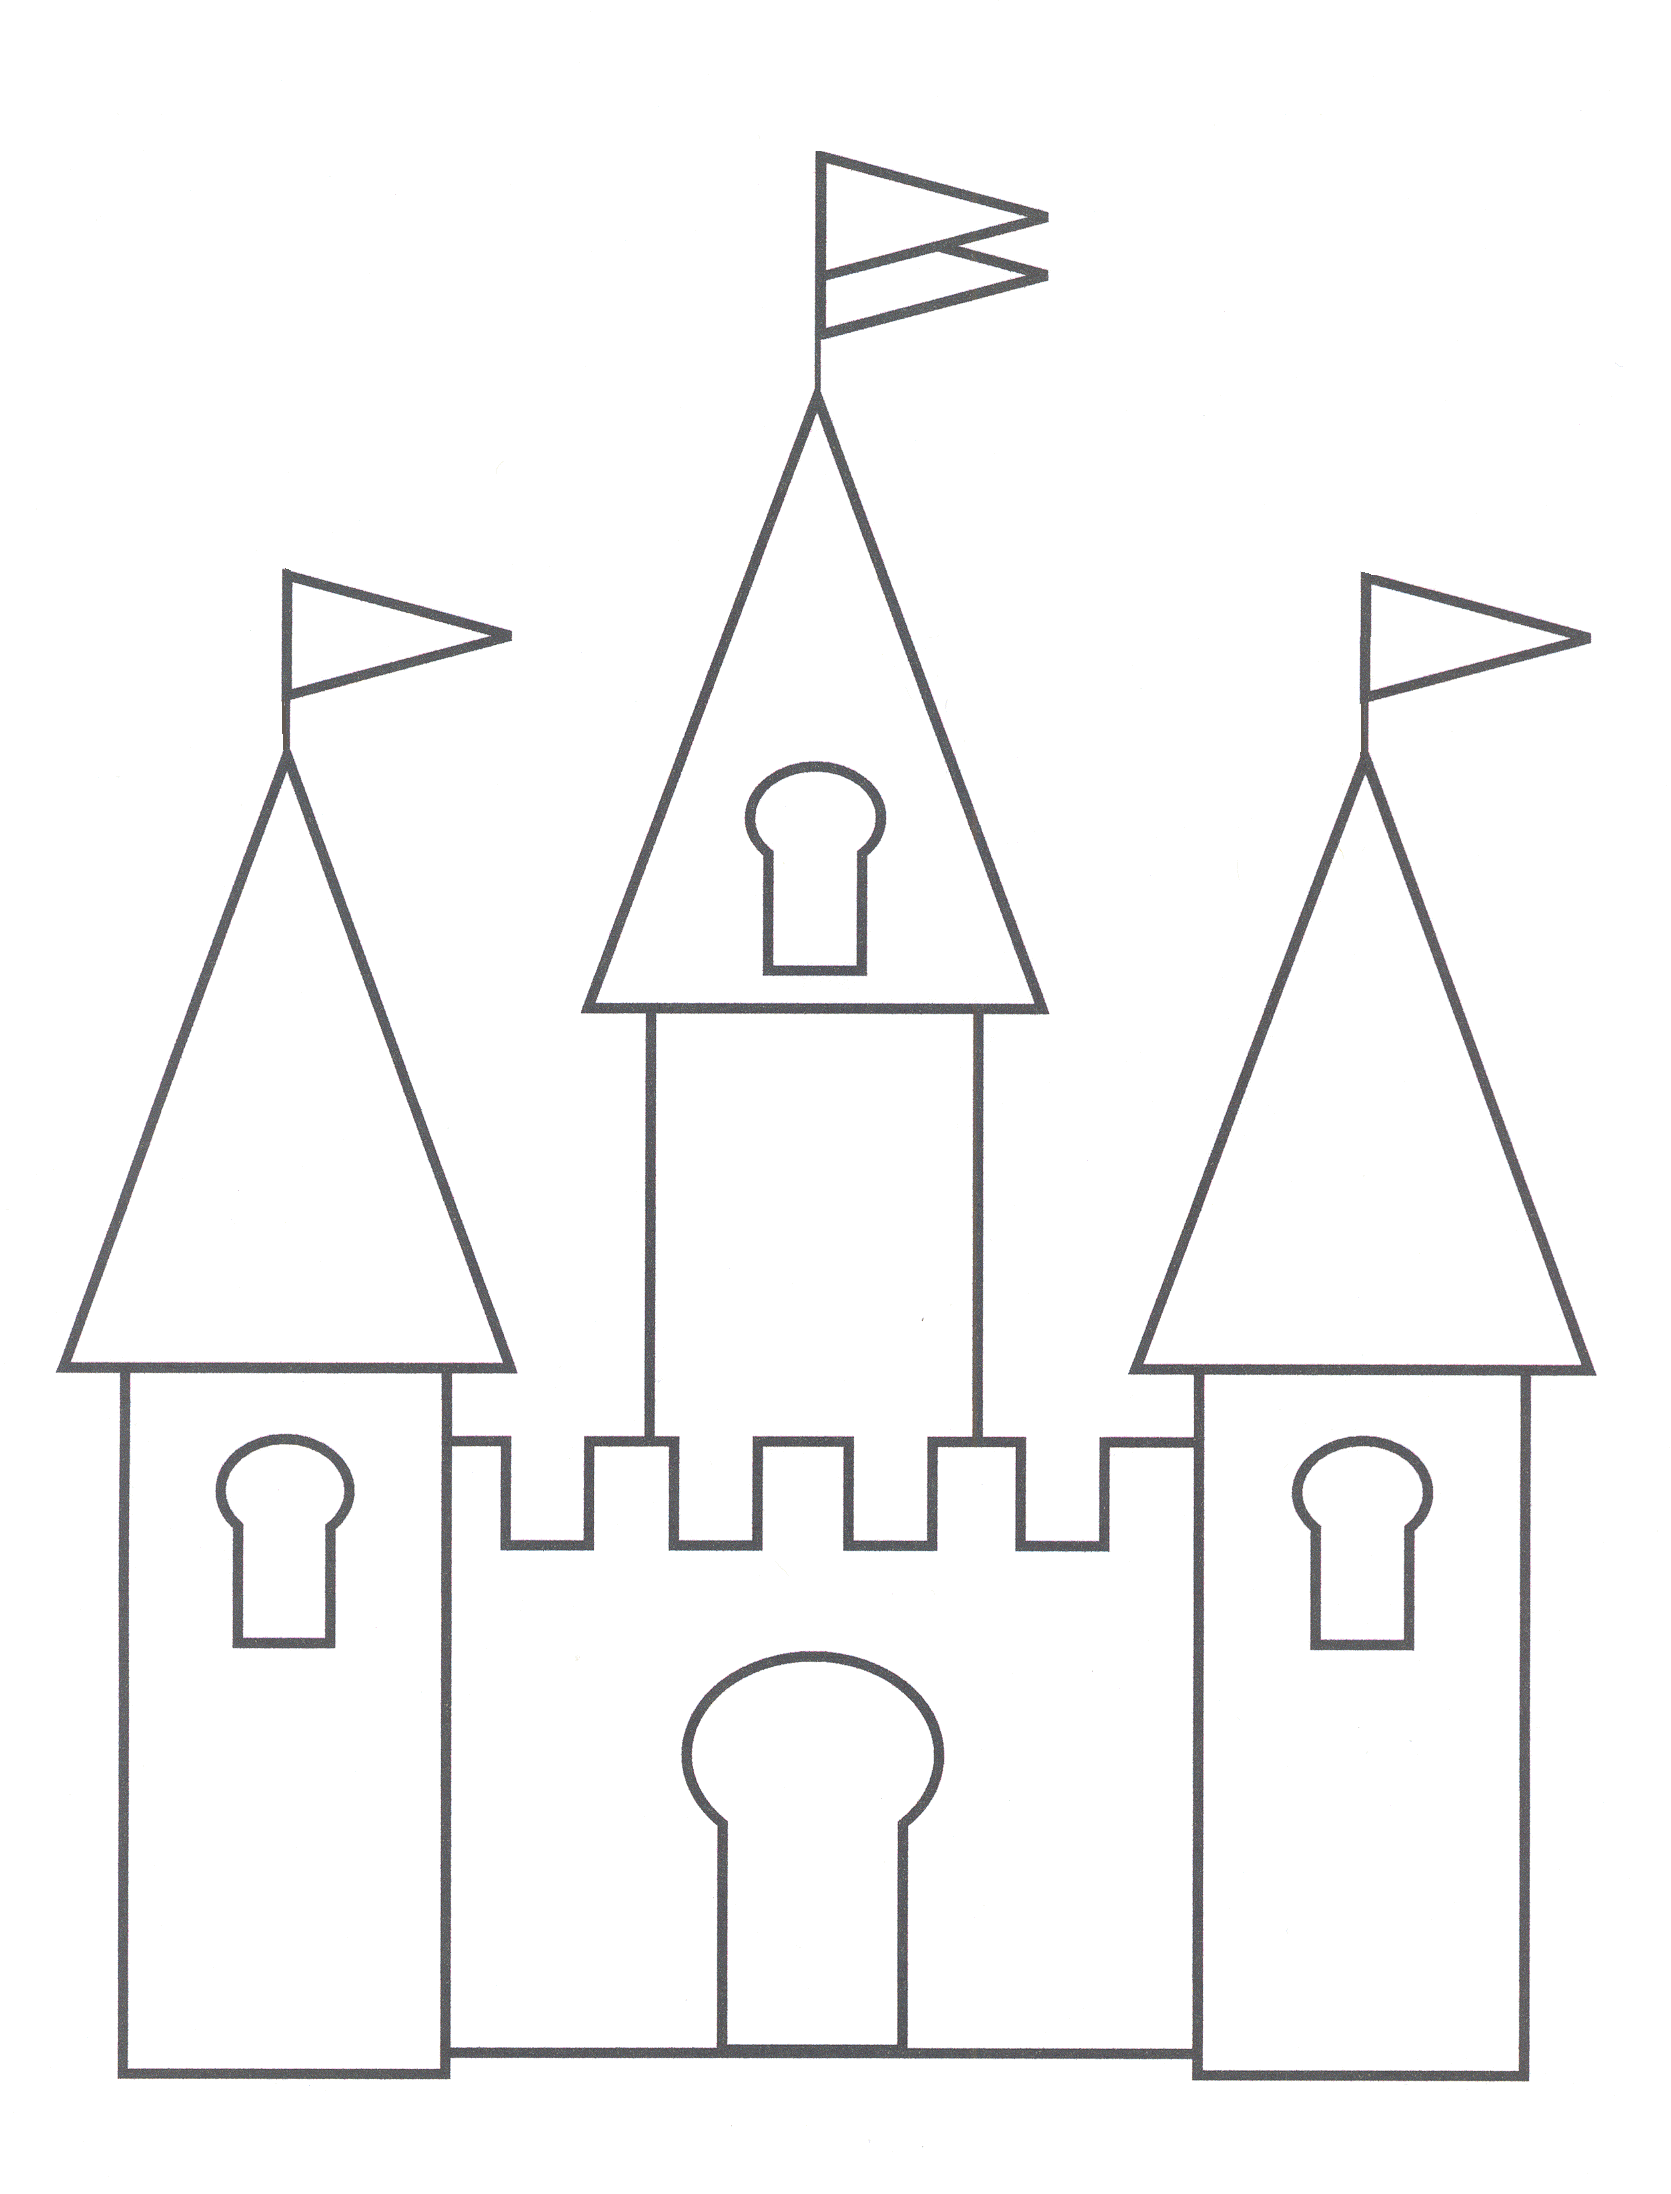 Castle Coloring Page Printable - Coloring Page